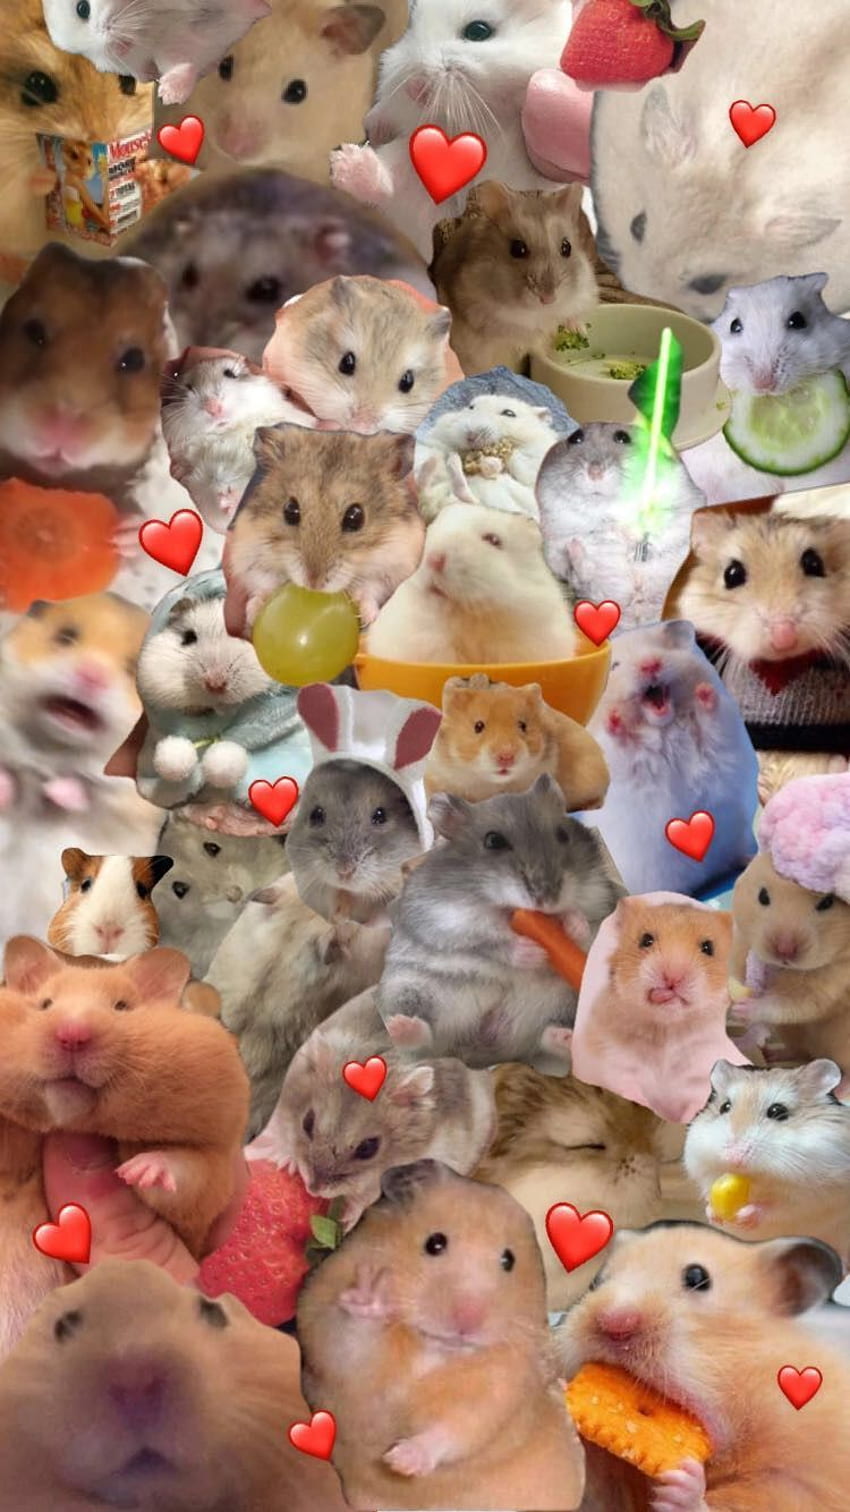 funny hamsters singing